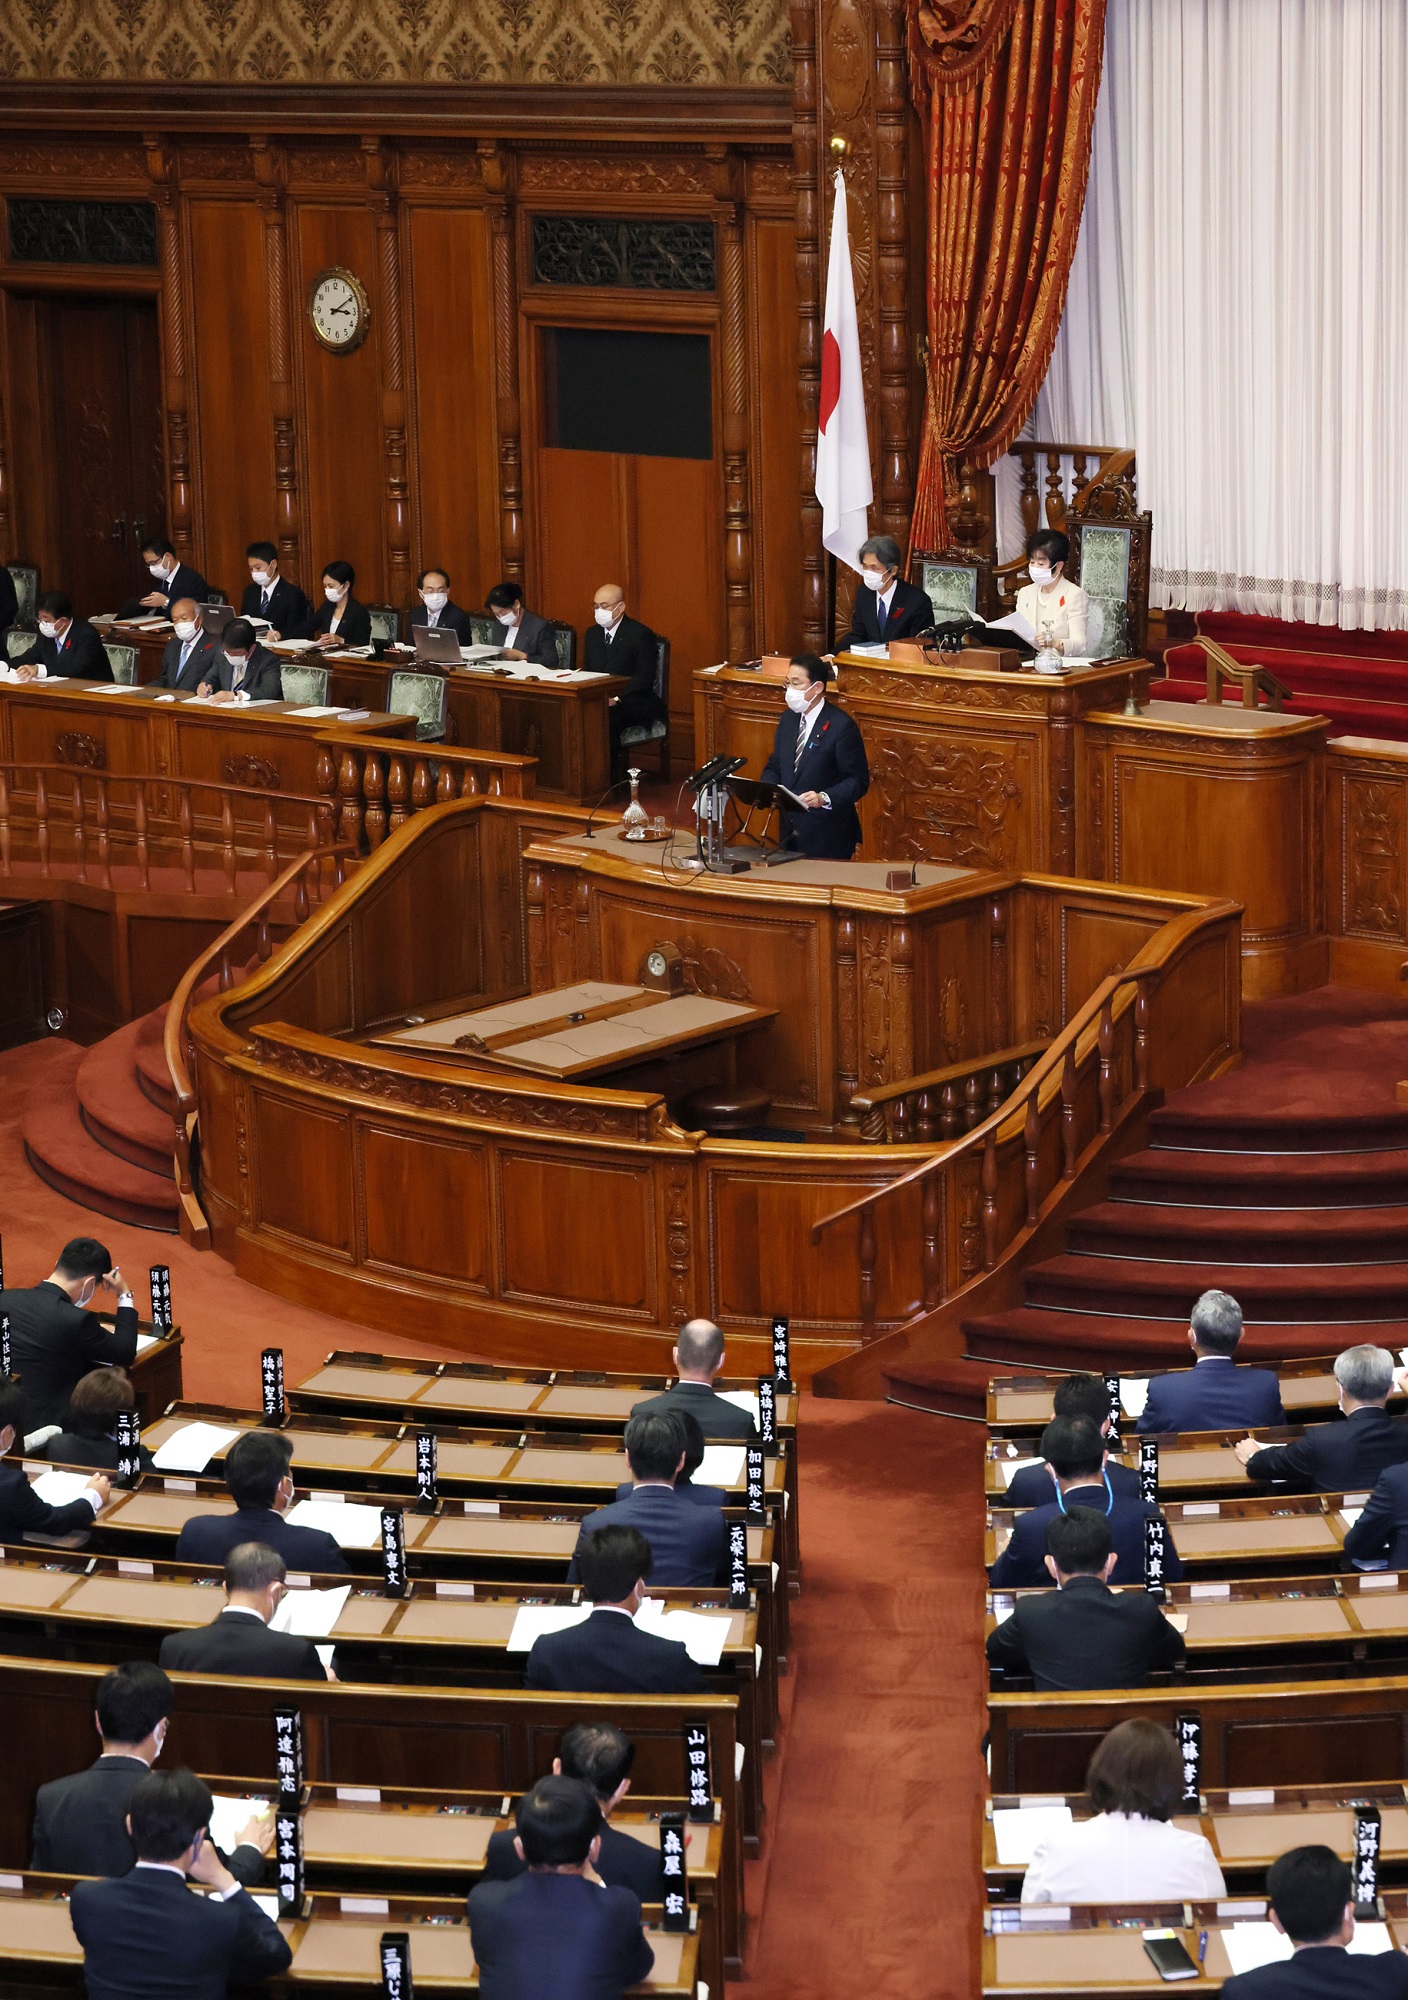 Photograph of the Prime Minister delivering a policy speech during a plenary session of the House of Representatives (12)